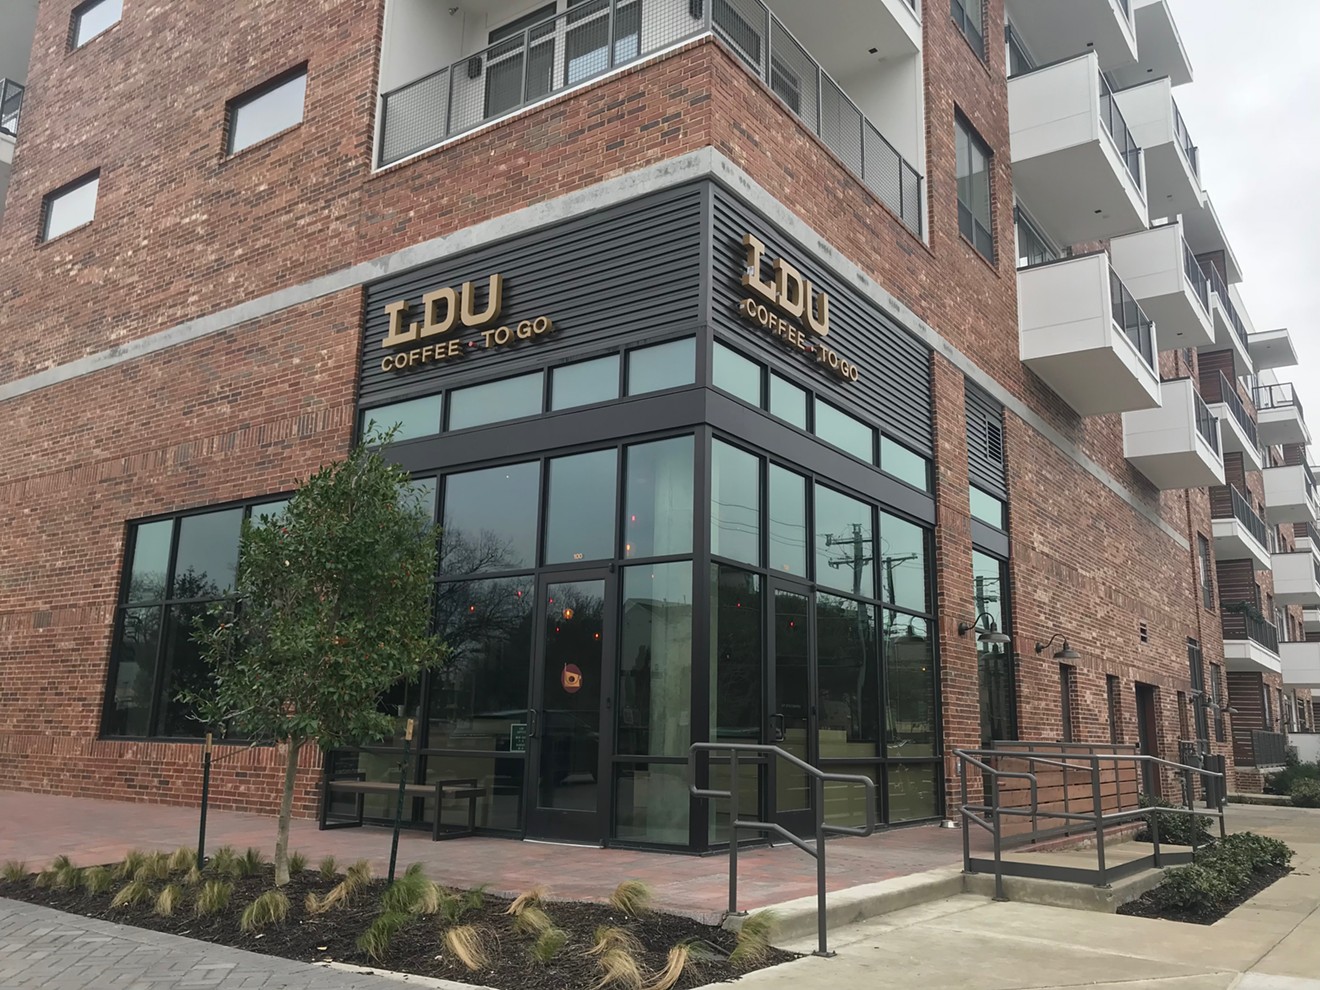 The new LDU Coffee is in a luxury apartment complex on Fitzhugh.